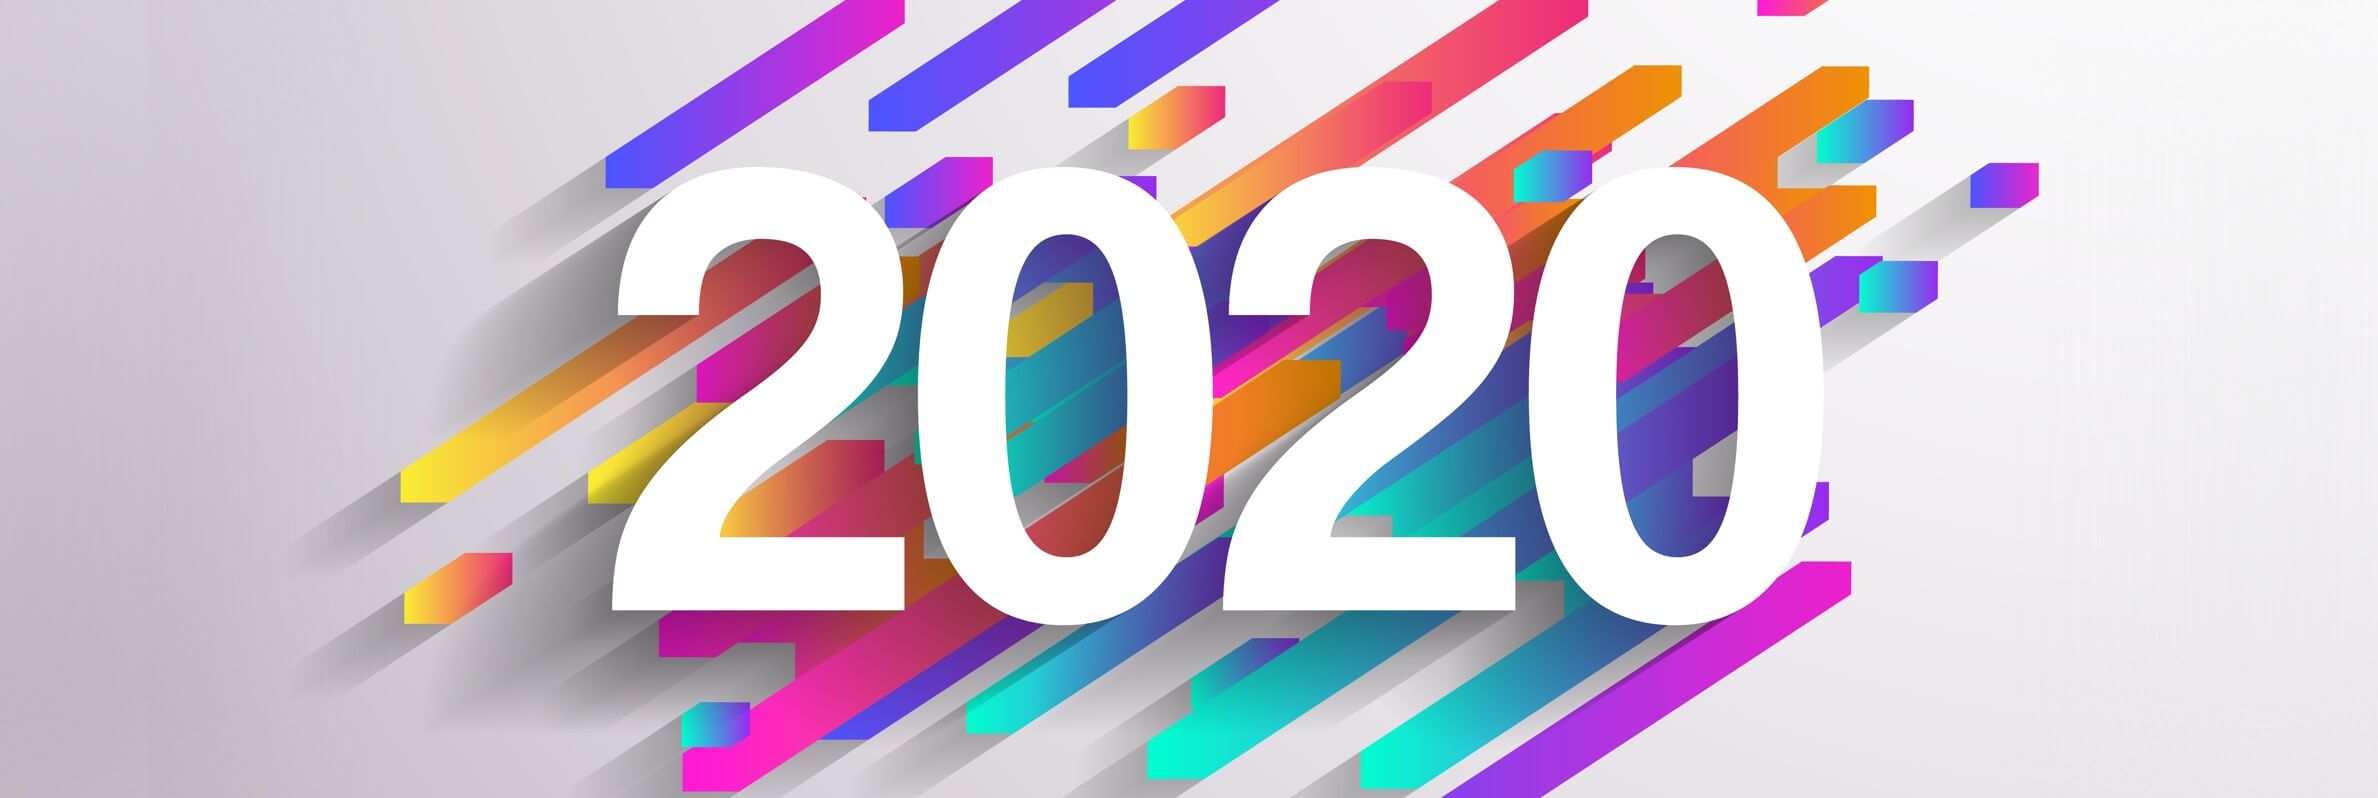 Photo for Digital trends for 2020: what to watch out for, and how to stay ahead